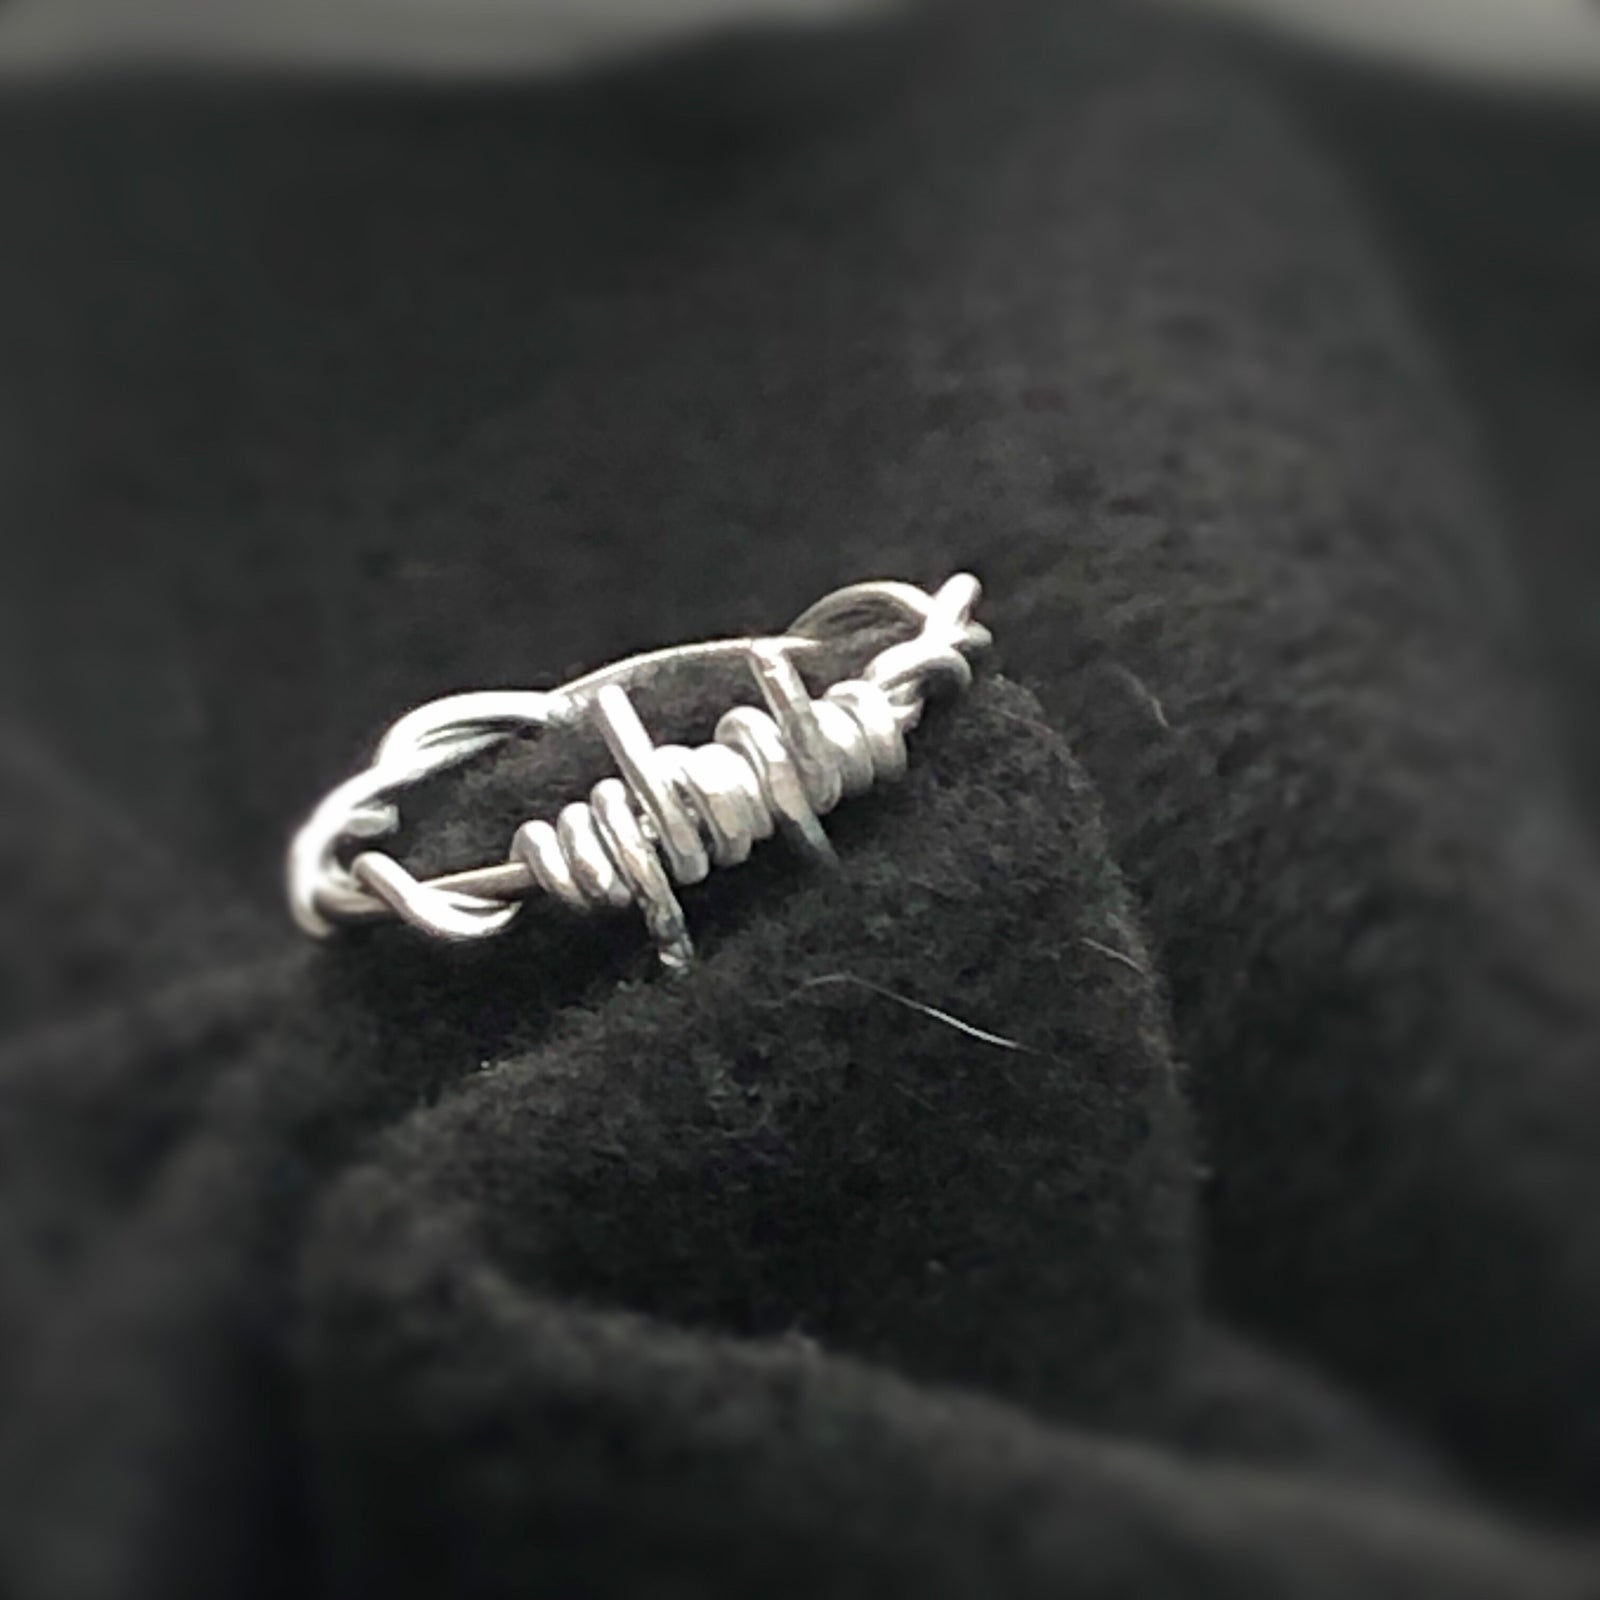 Entangled silver wire ring in a grunge optic